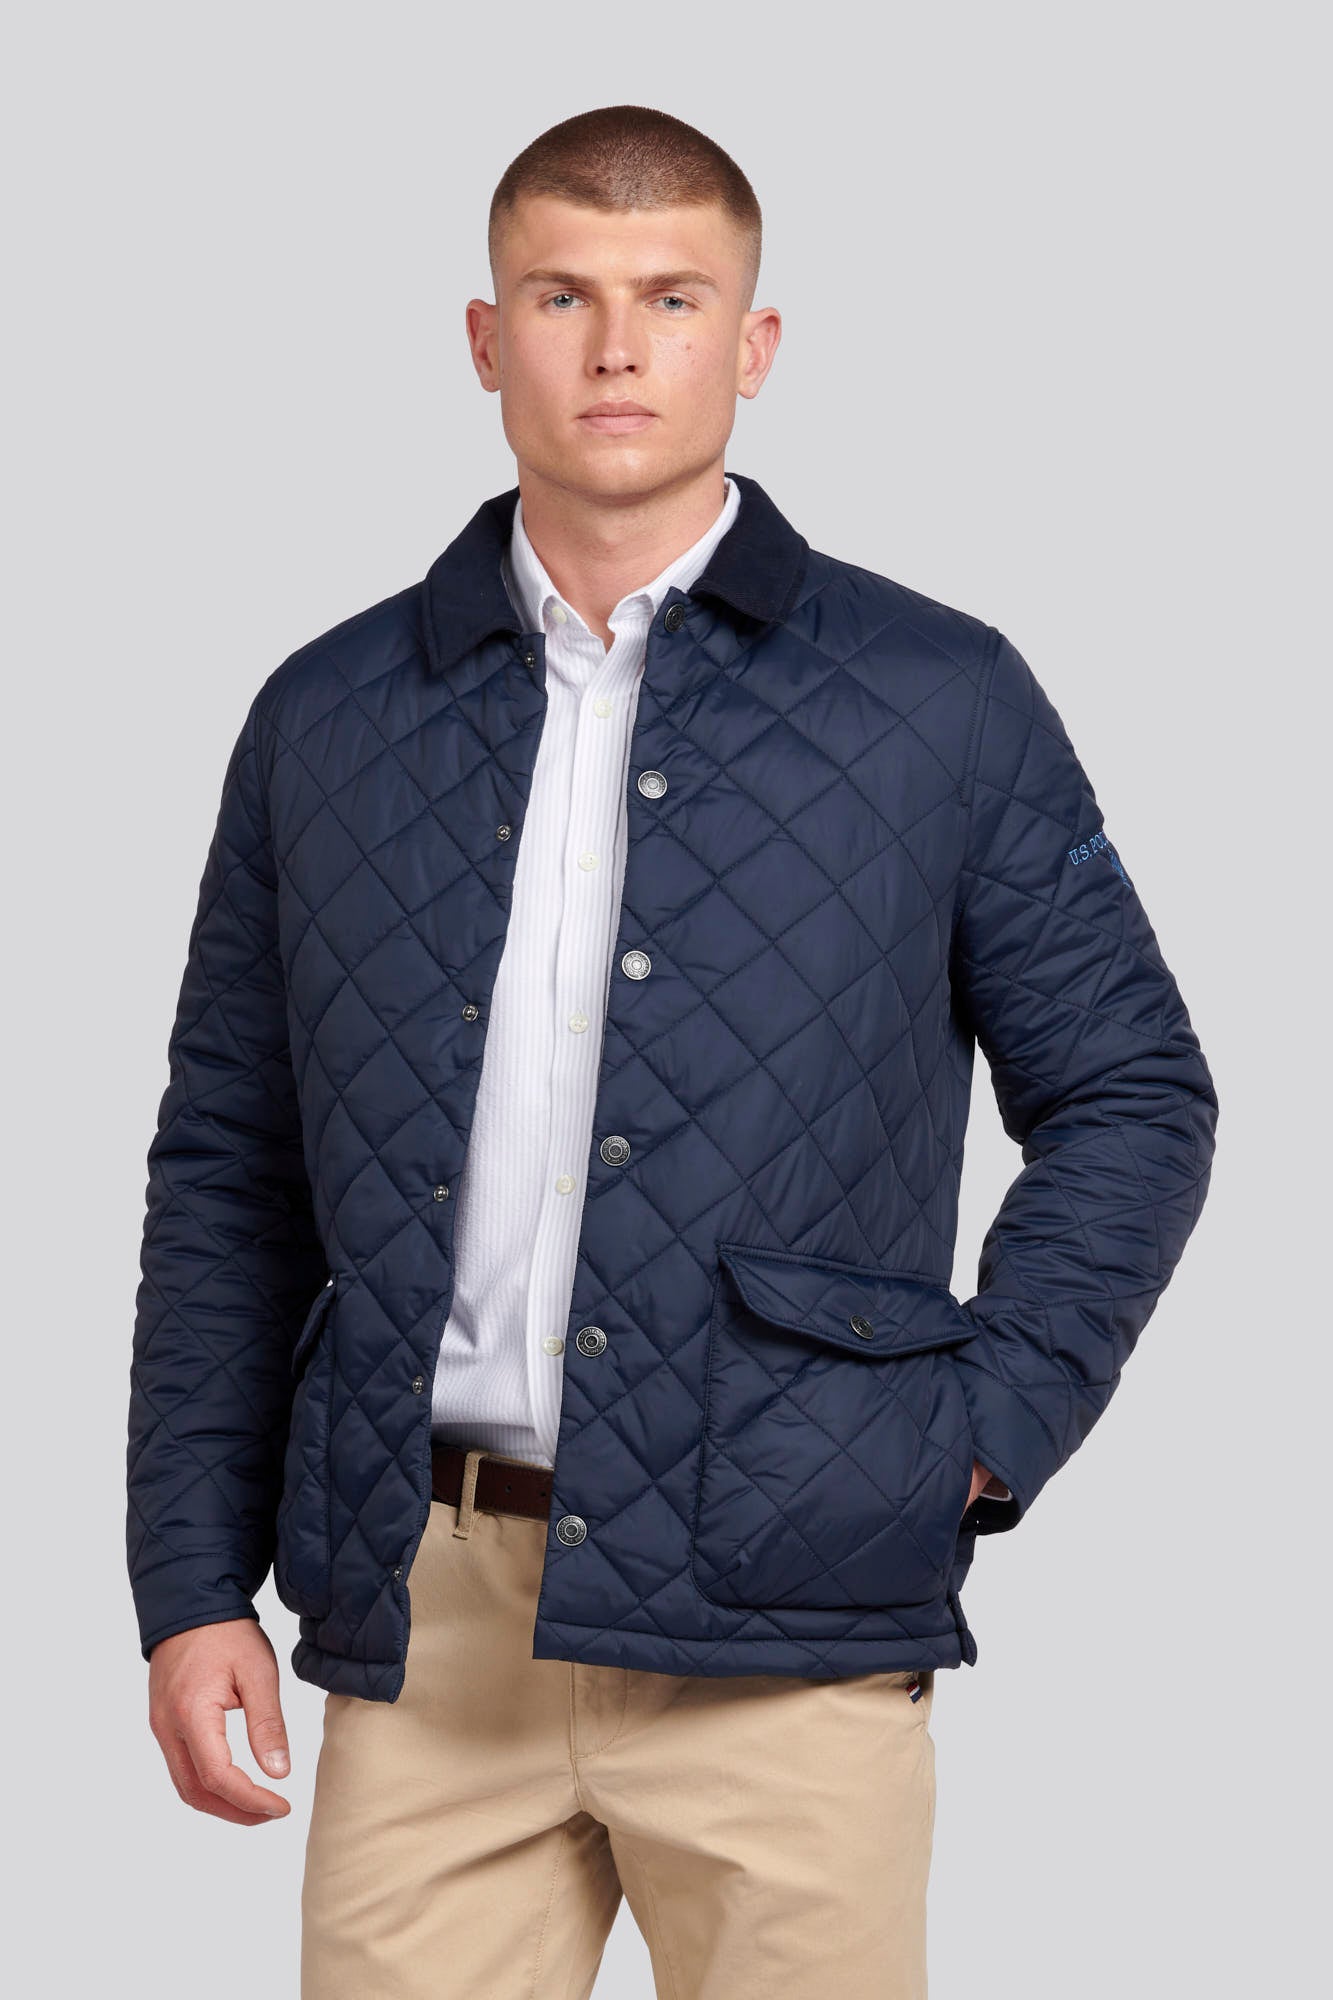 U.S. Polo Assn. Mens Quilted Collared Jacket in Dark Sapphire Navy